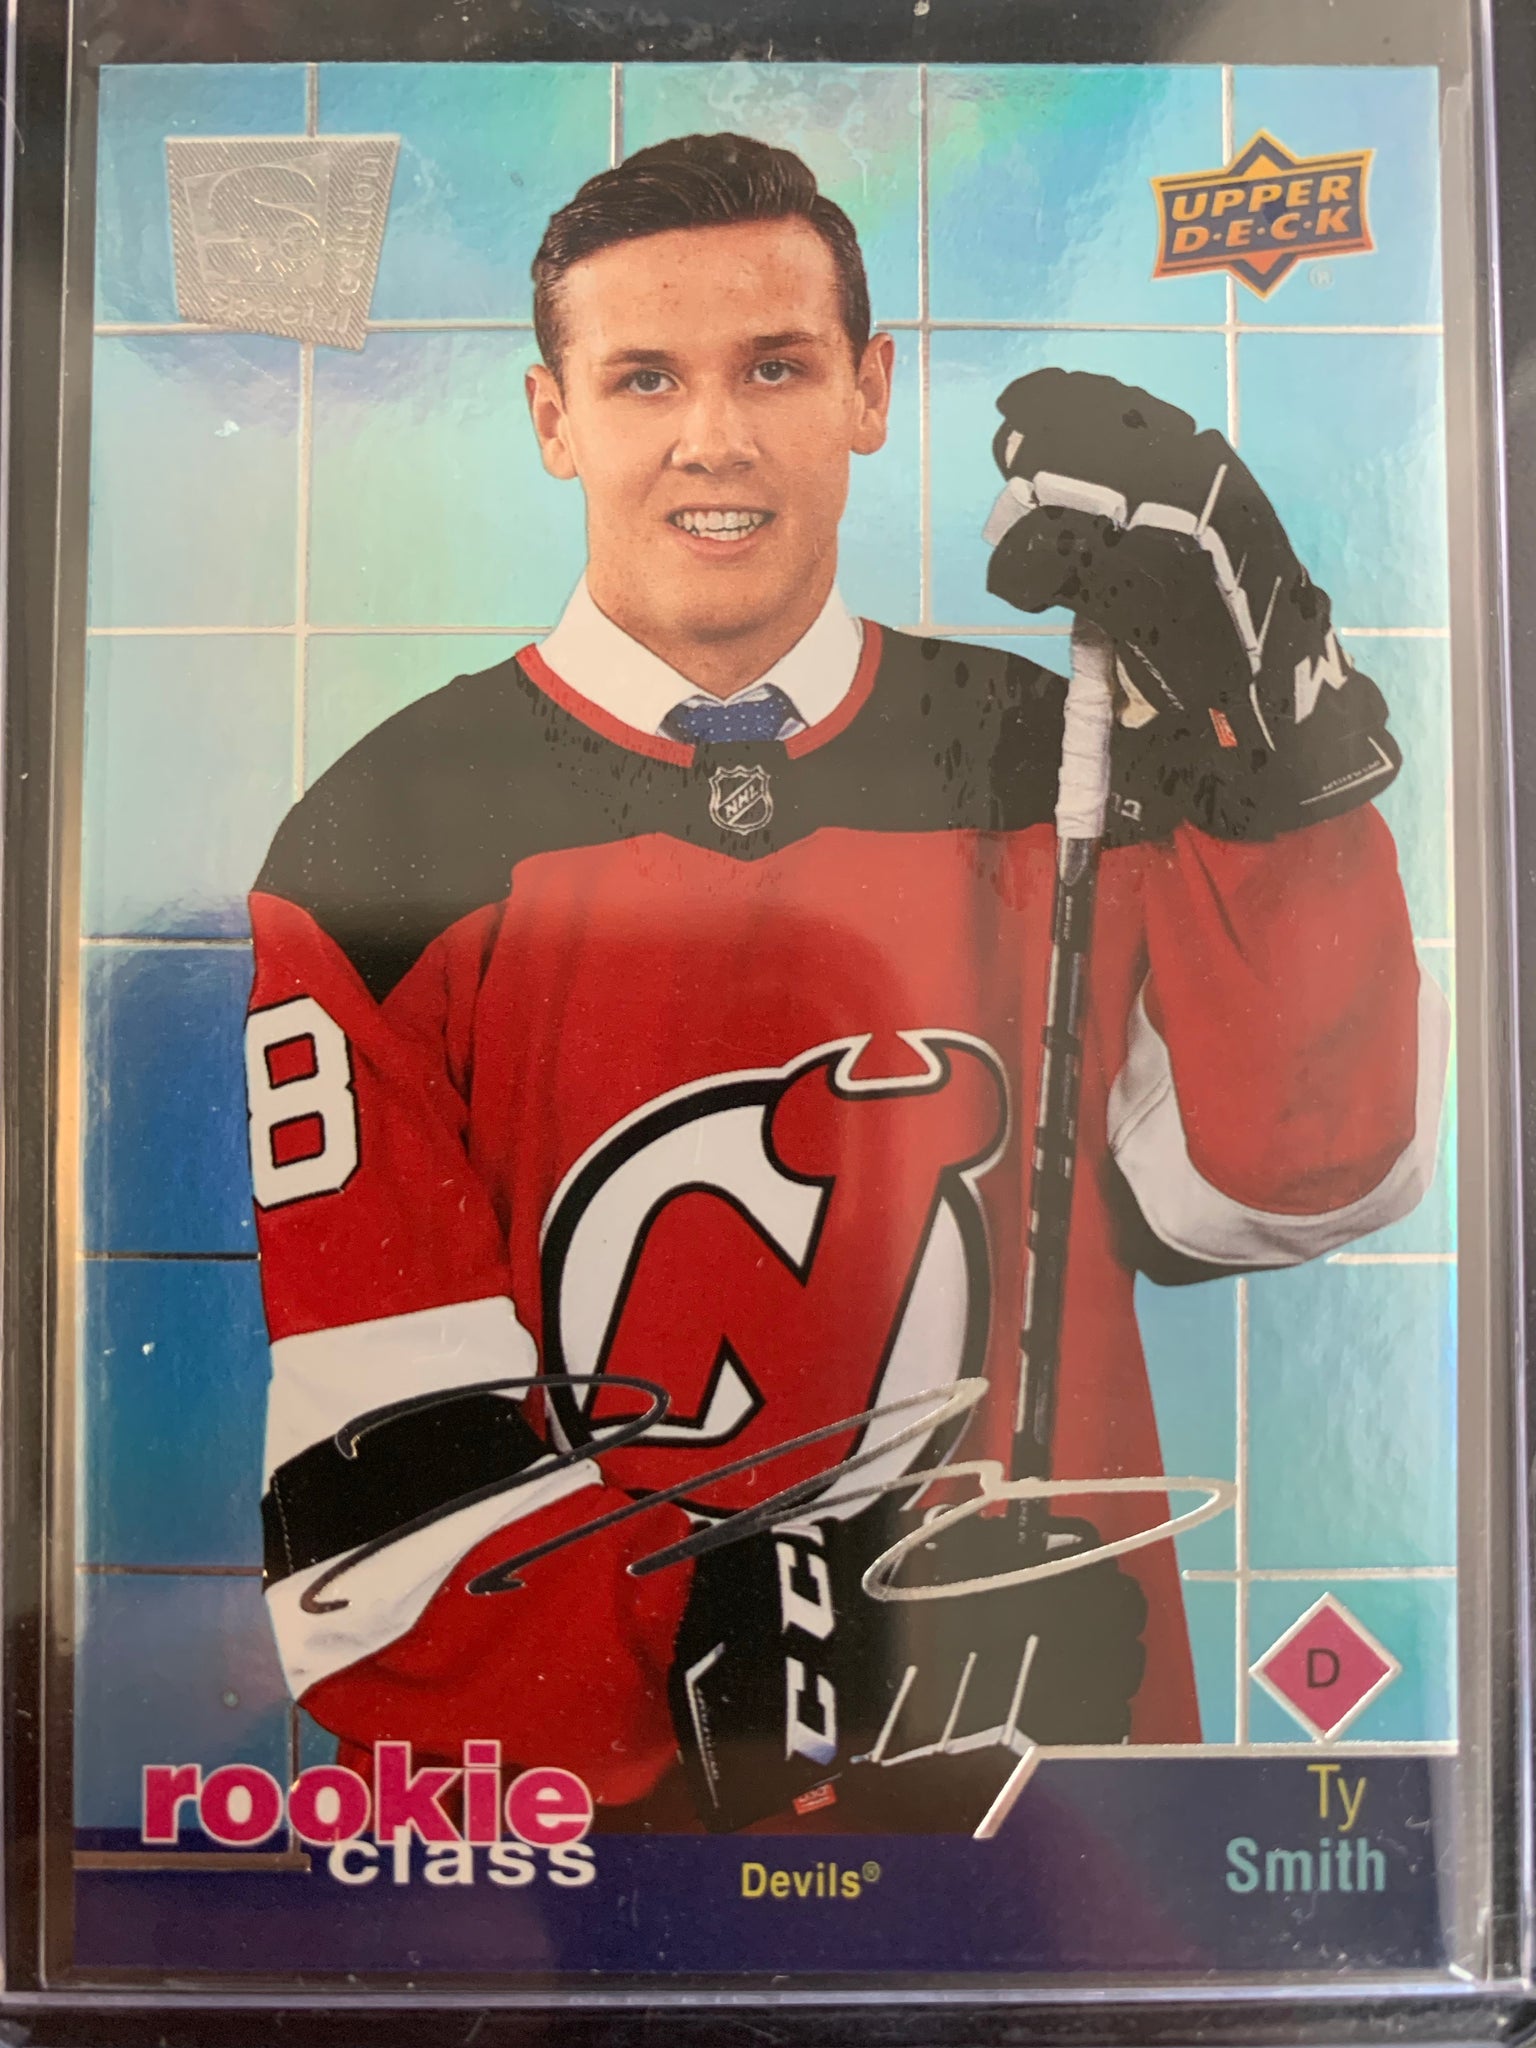 2020-21 UPPER DECK EXTENDED HOCKEY #RC-23 NEW JERSEY DEVILS - TY SMITH ROOKIE CLASS ROOKIE CARD